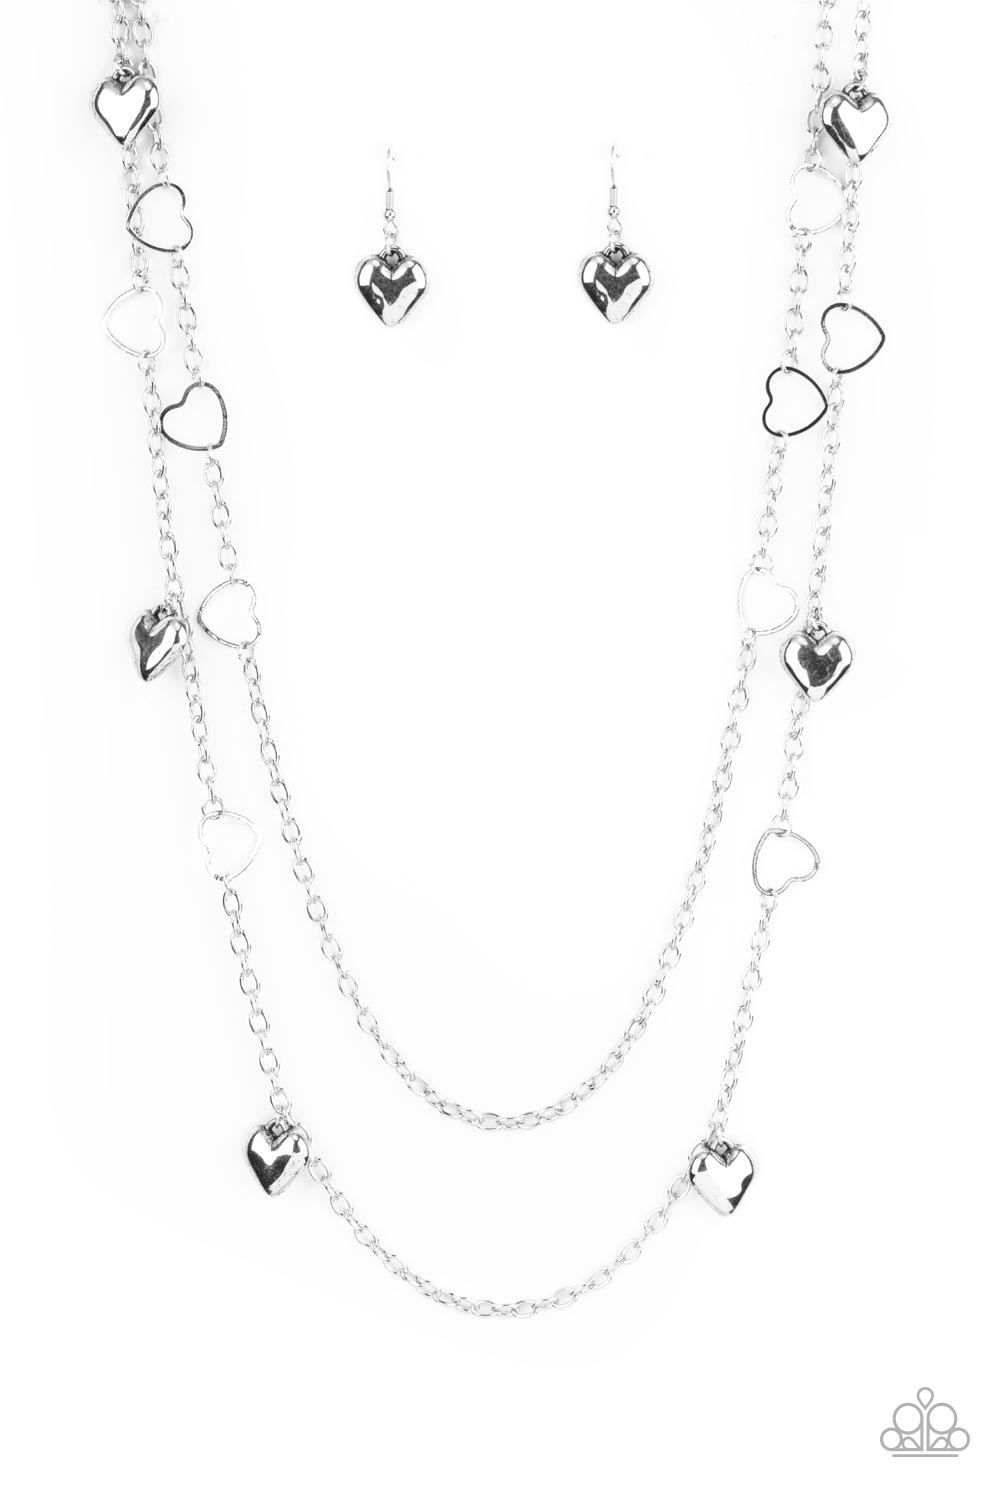 Paparazzi - Chicly Cupid - Silver Necklace  - Alies Bling Bar